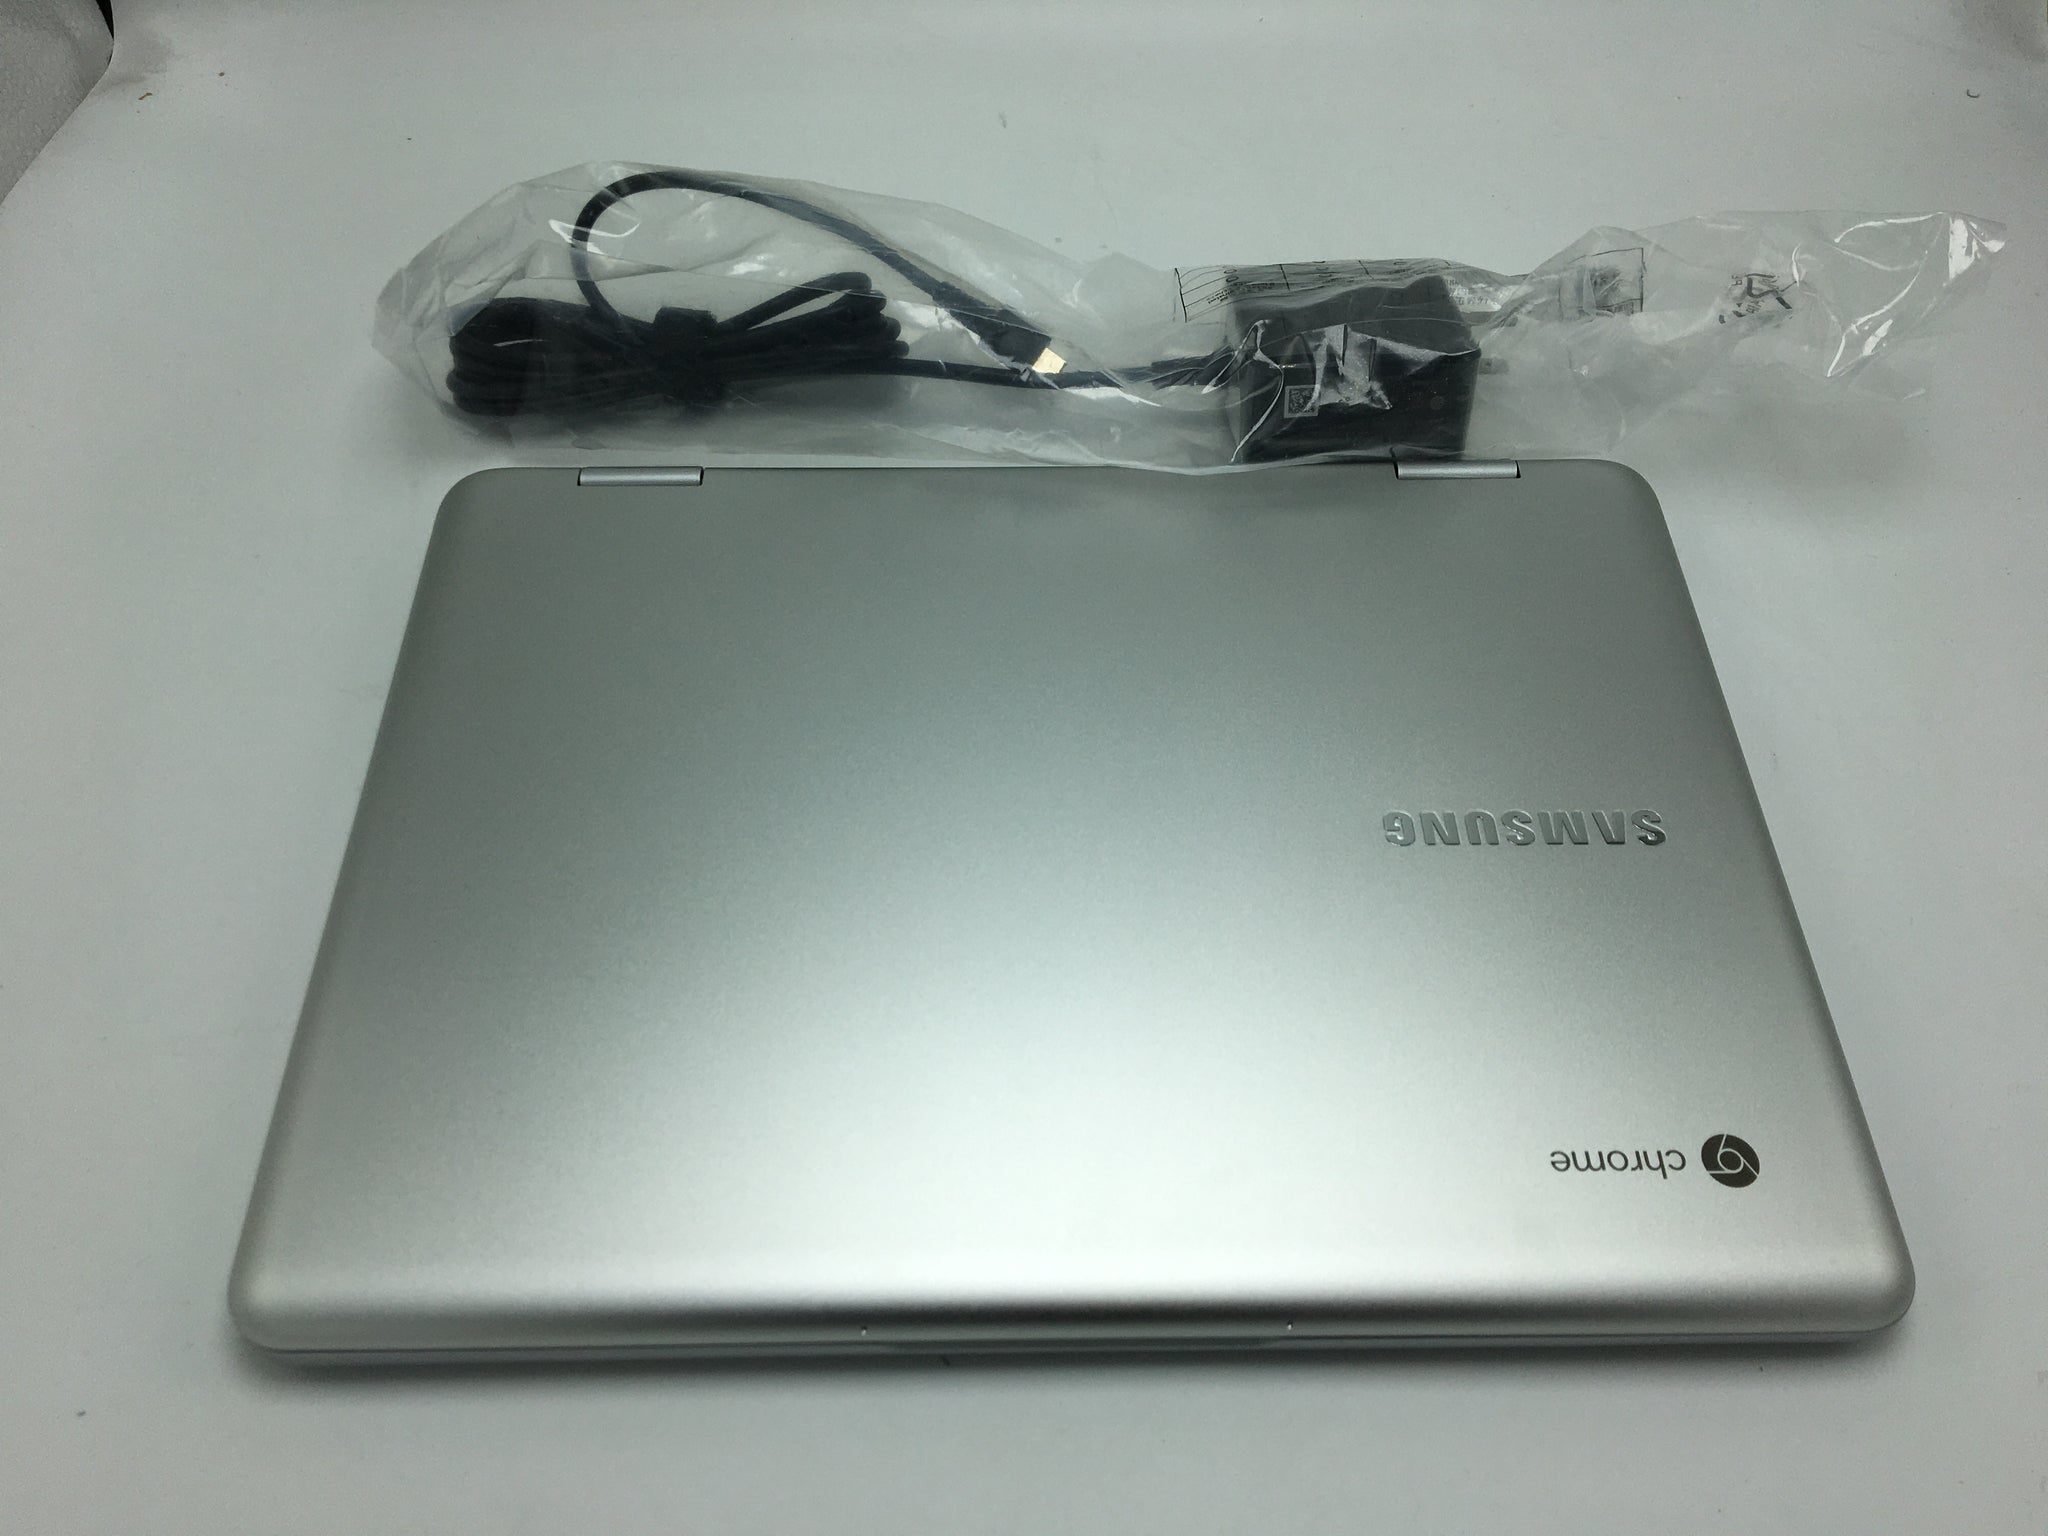 Samsung Chromebook 12.2" Touchscreen 2-in-1 Laptop Notebook Tablet 4GB/64GB